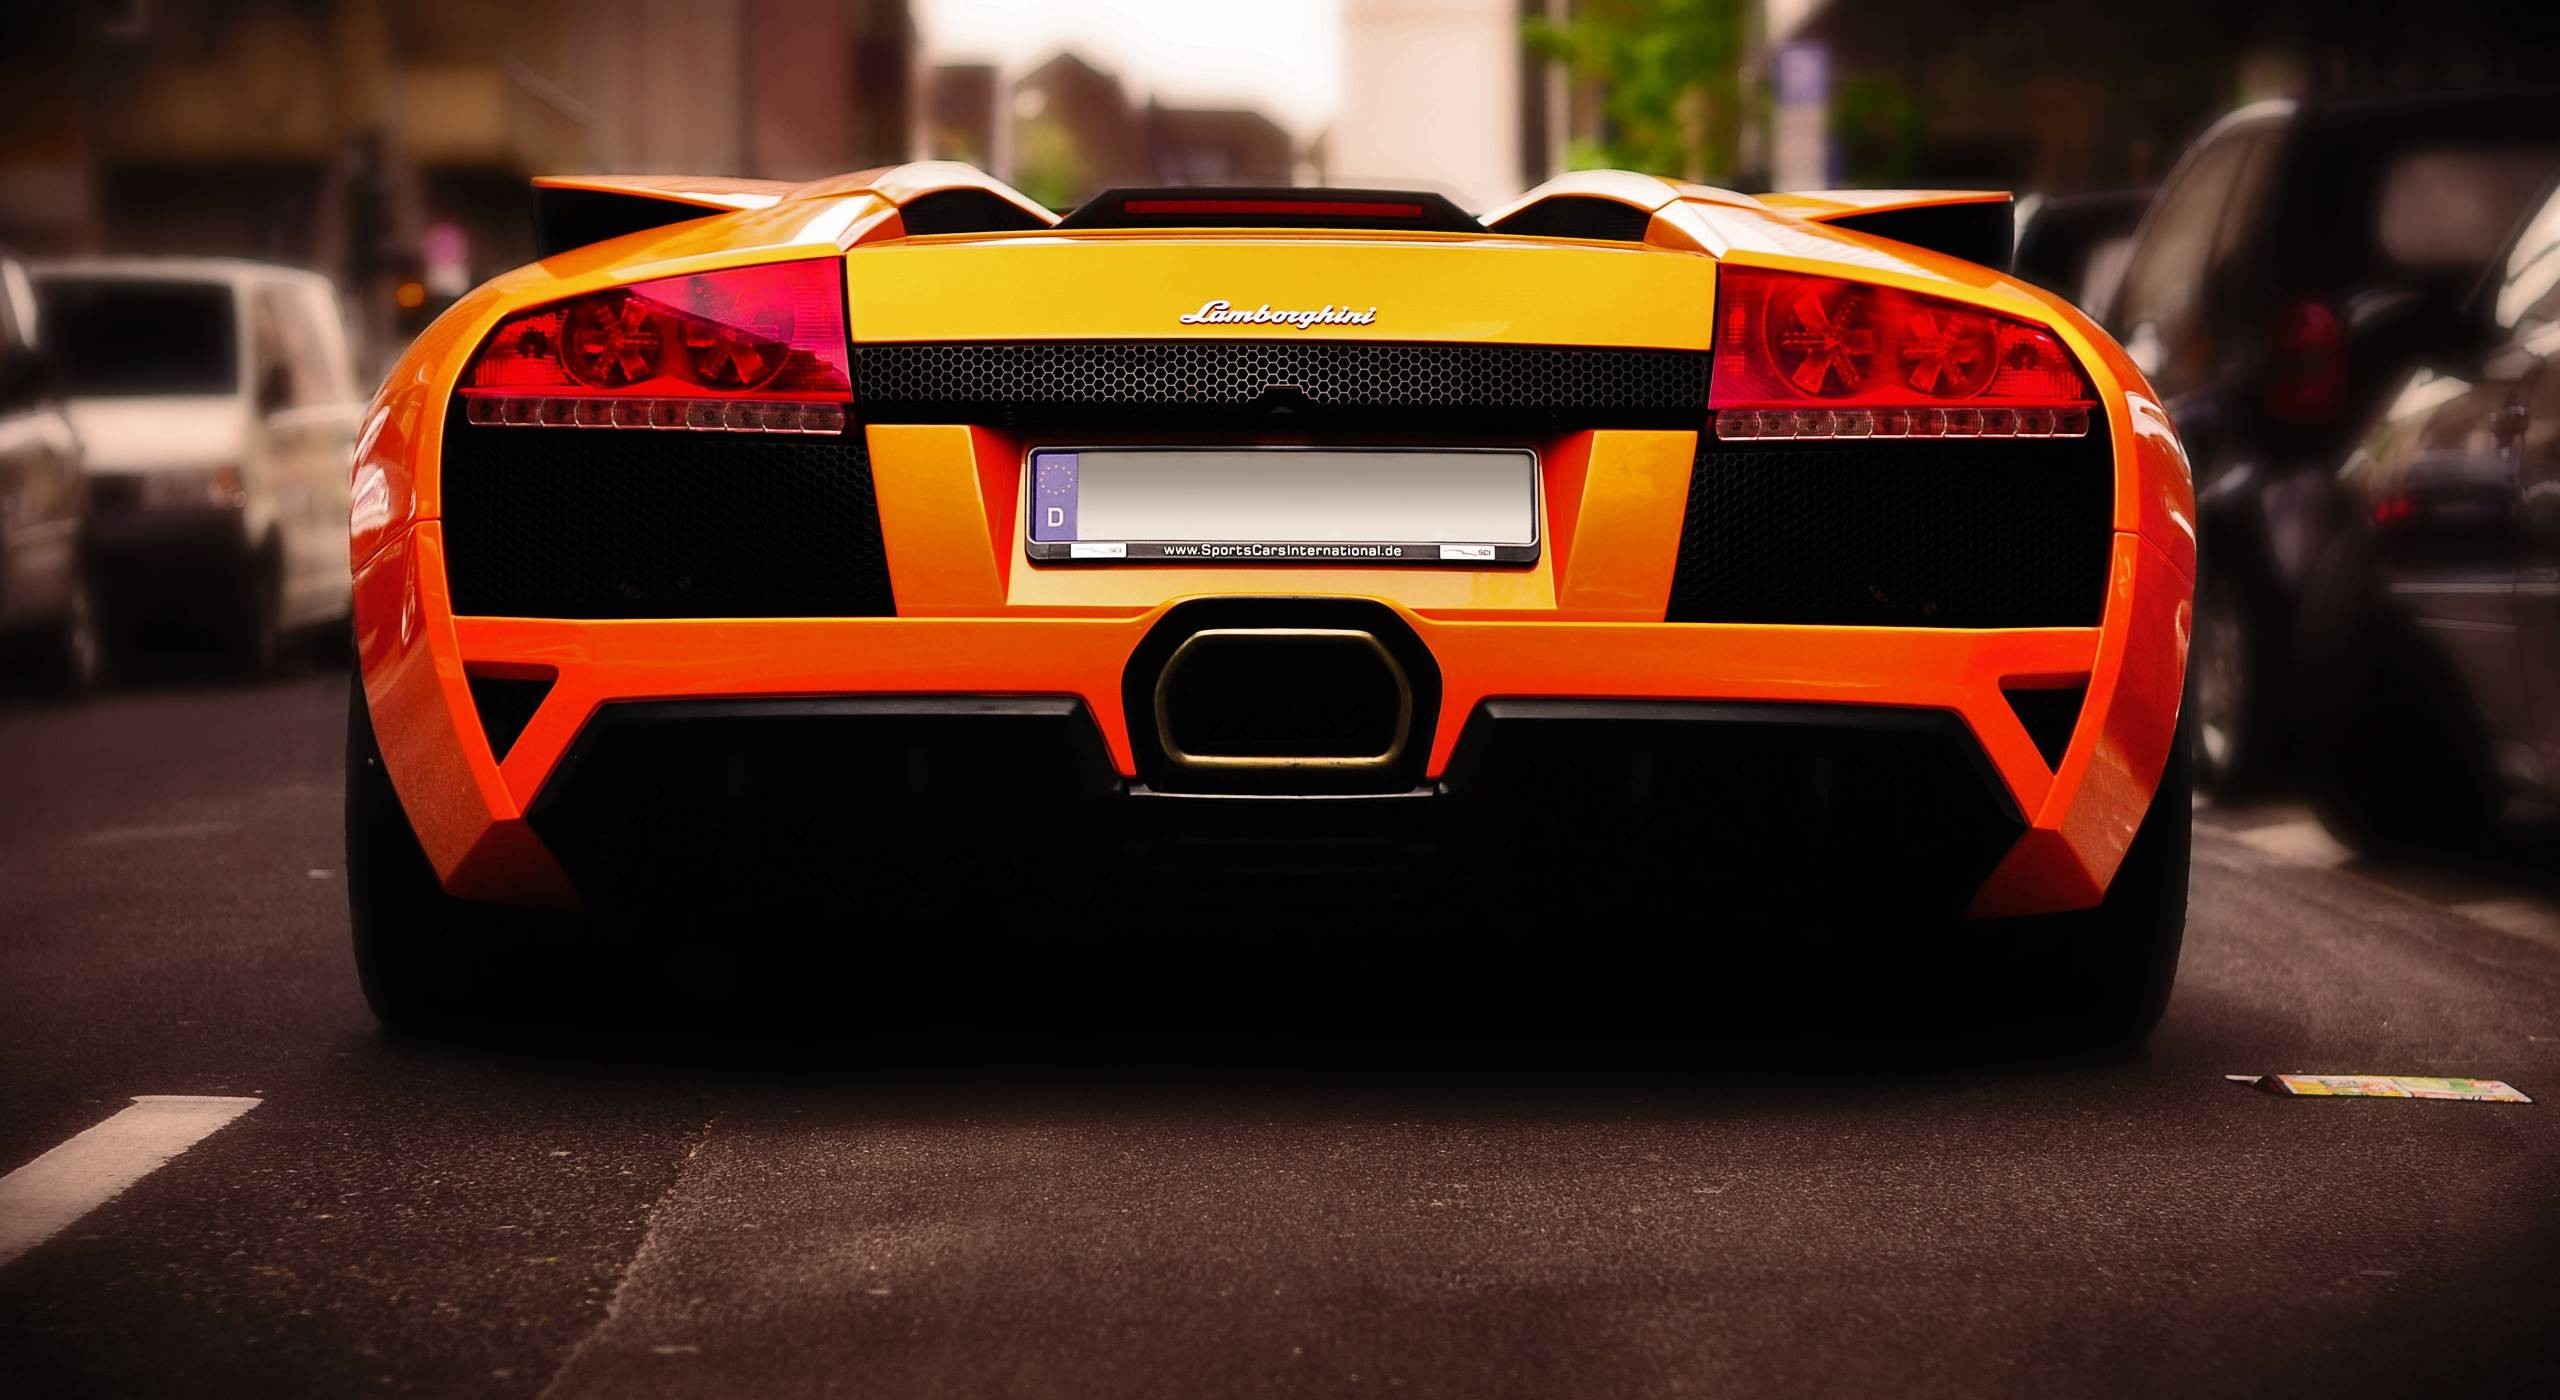 2560x1400 Wallpapers Supercars